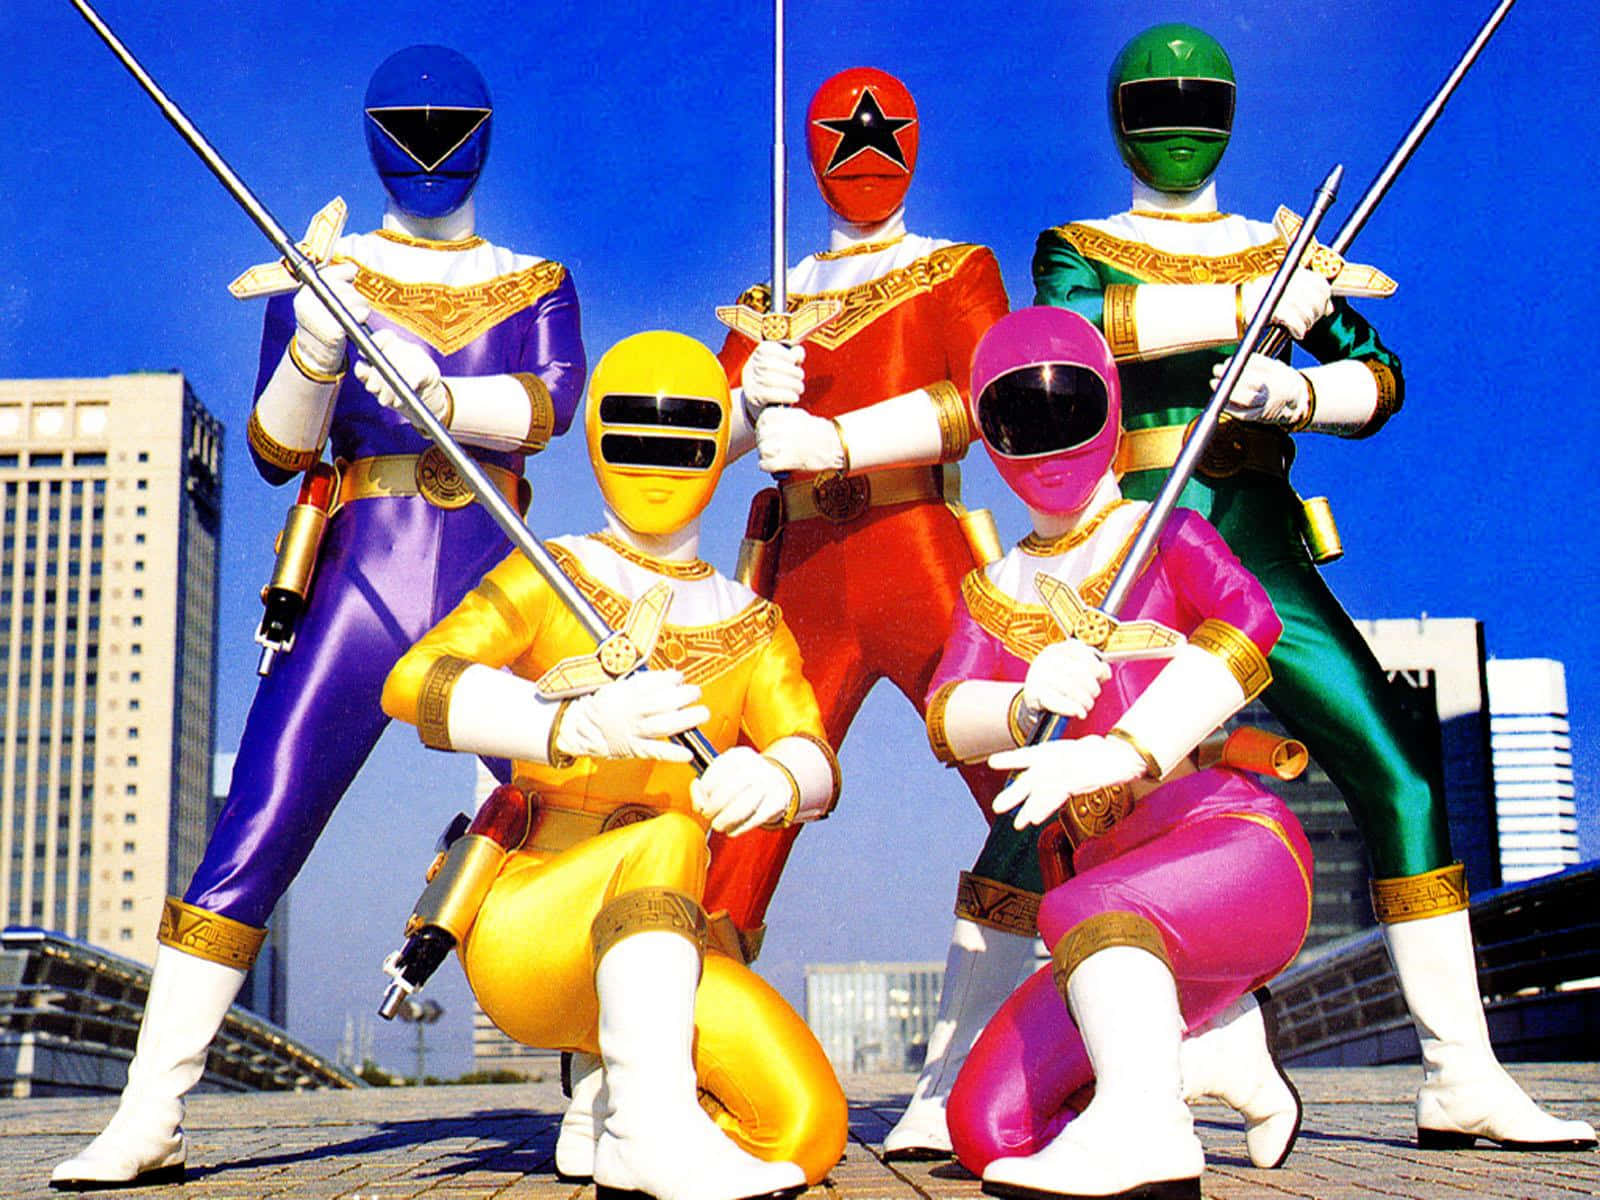 "The Power Rangers Are Here To Protect Us!"